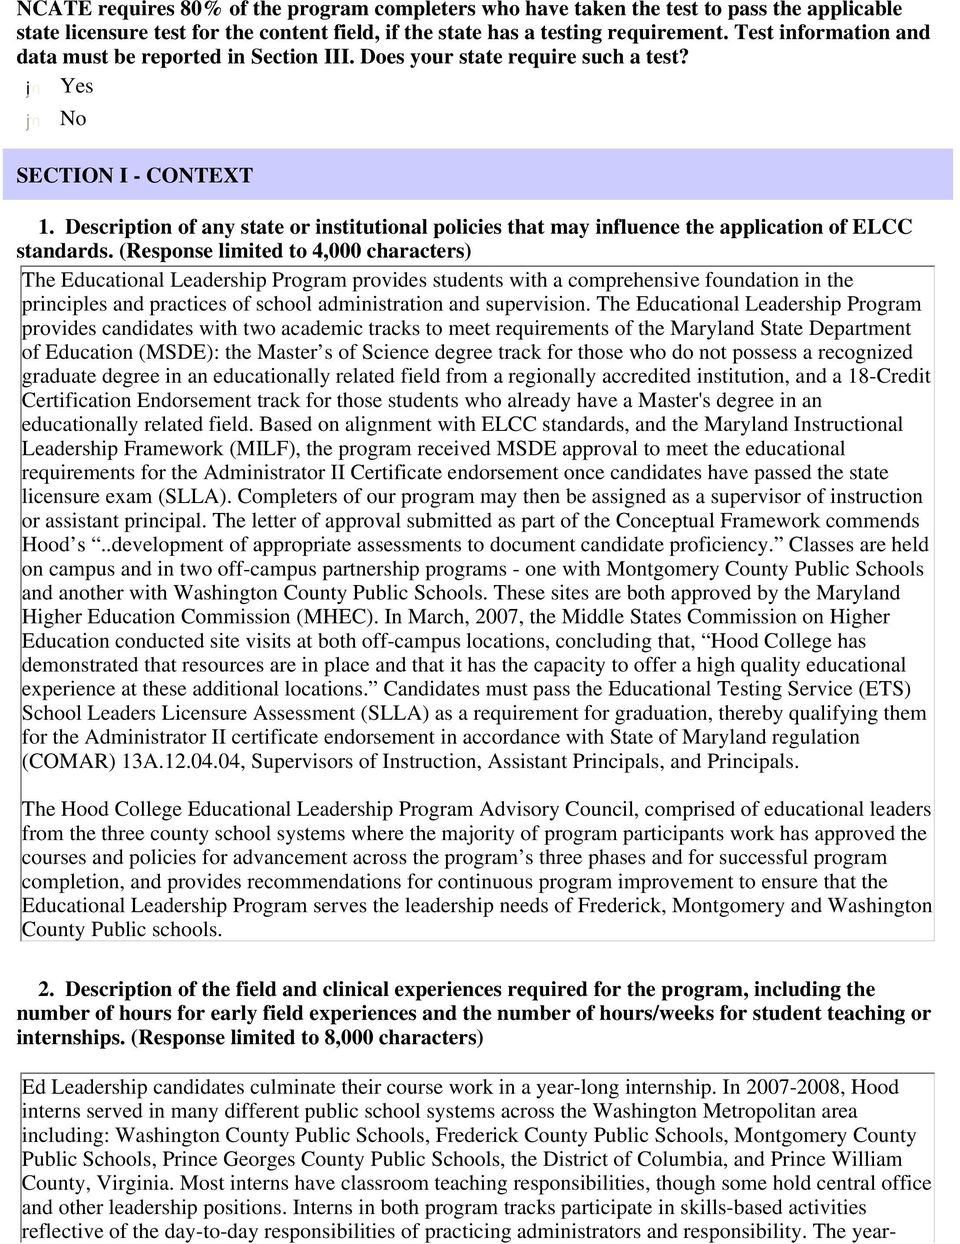 Description of any state or institutional policies that may influence the application of ELCC standards.